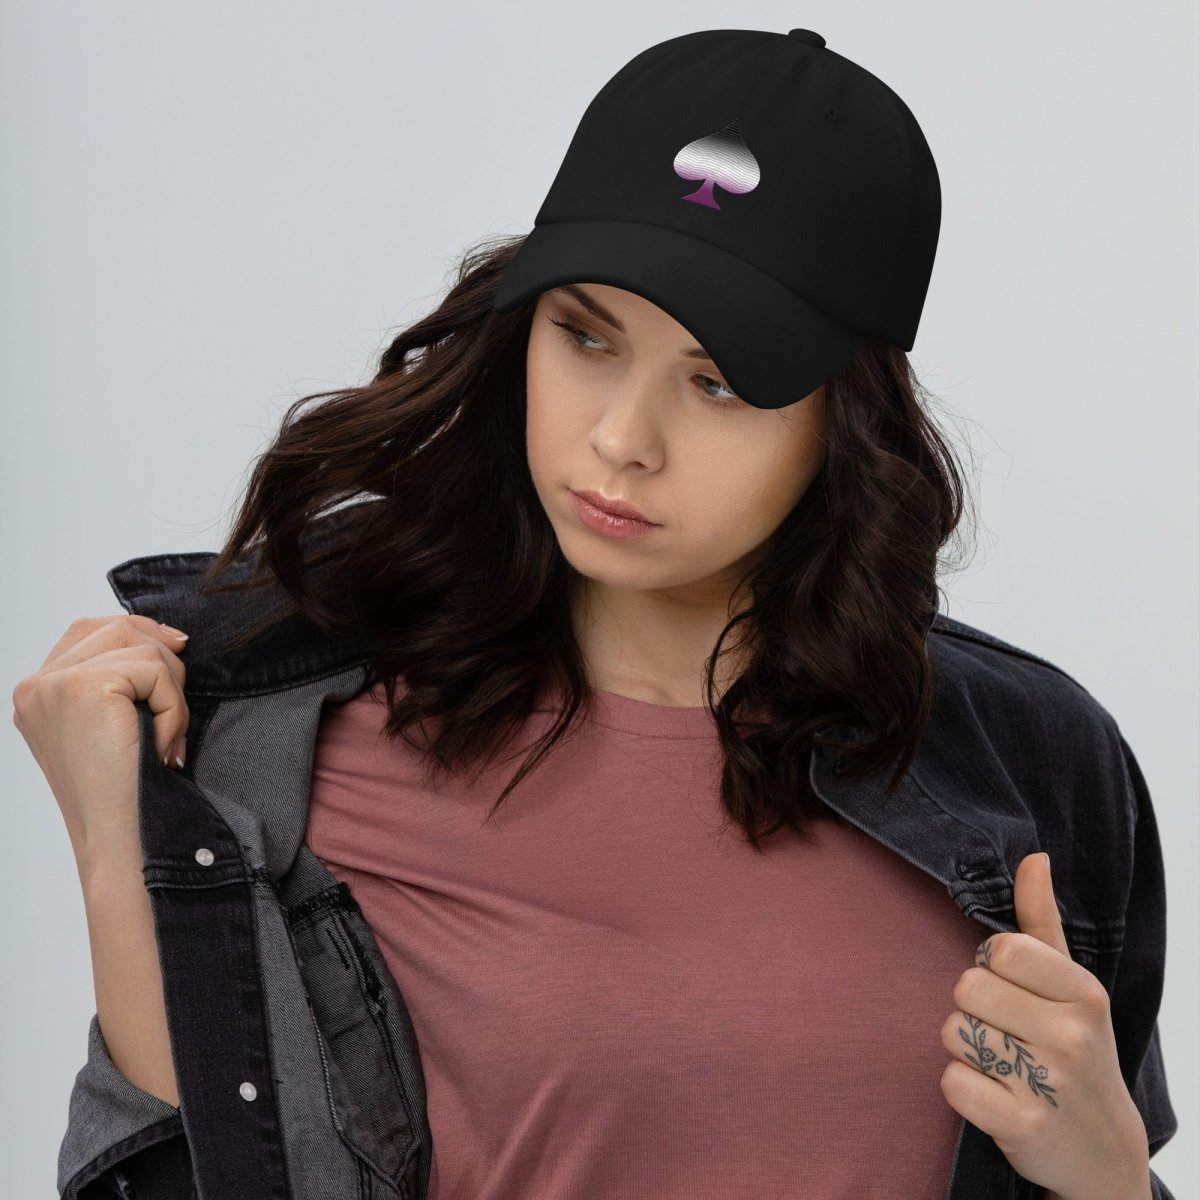 Embroidered Ace of Spades Dad Hat - On Trend Shirts